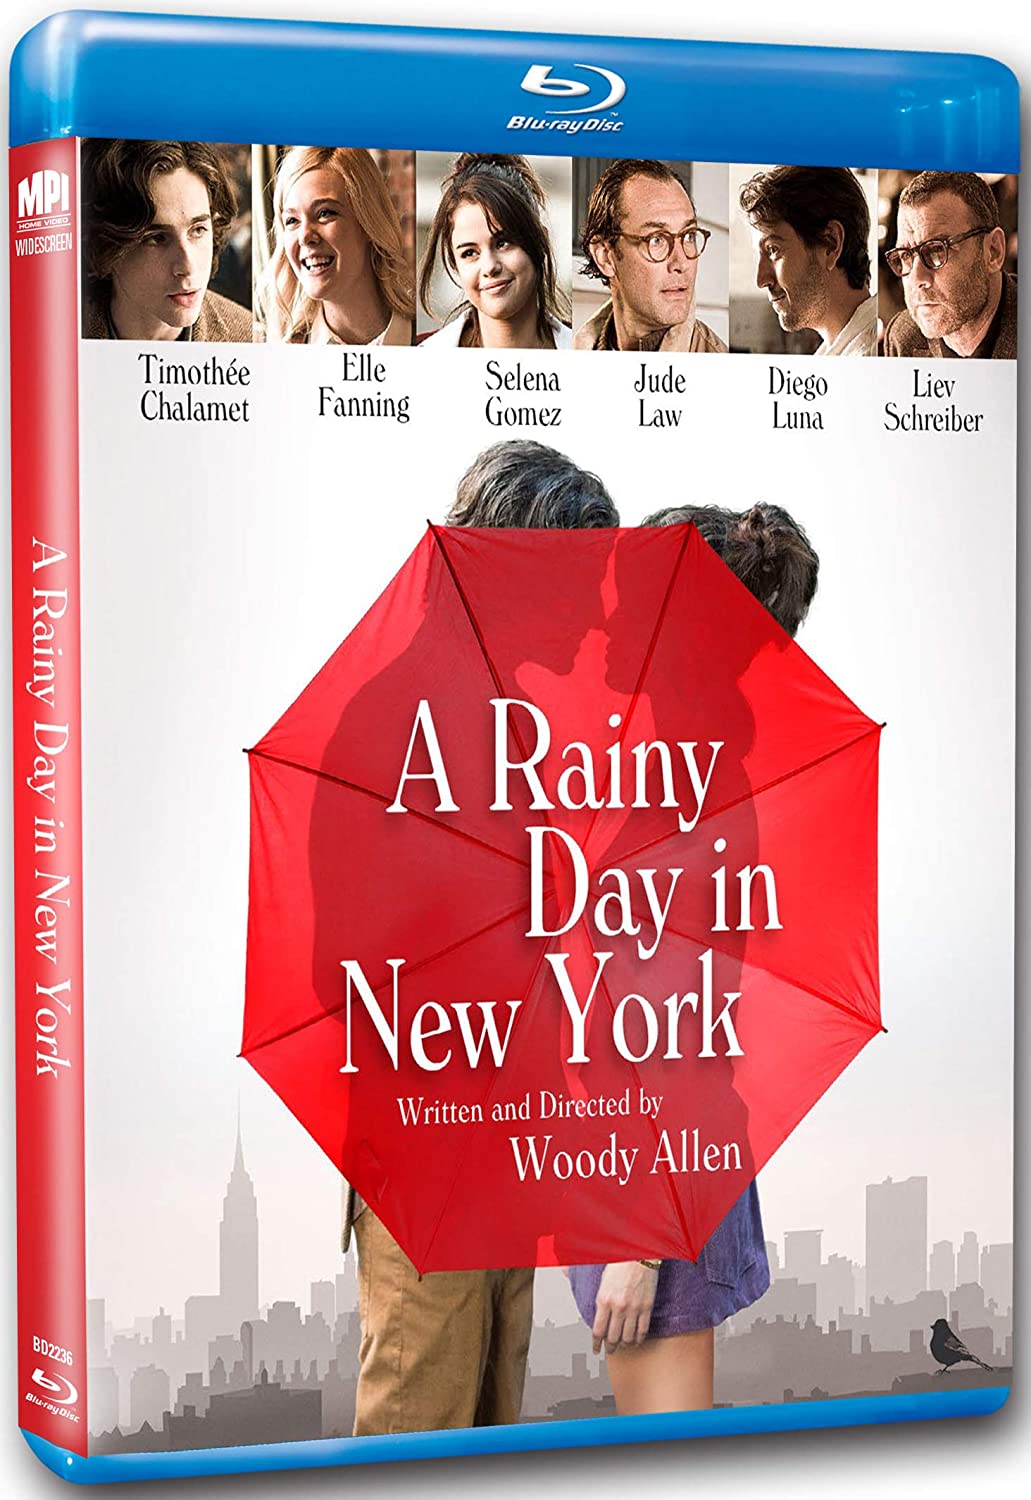 A Rainy Day in New York—A Review